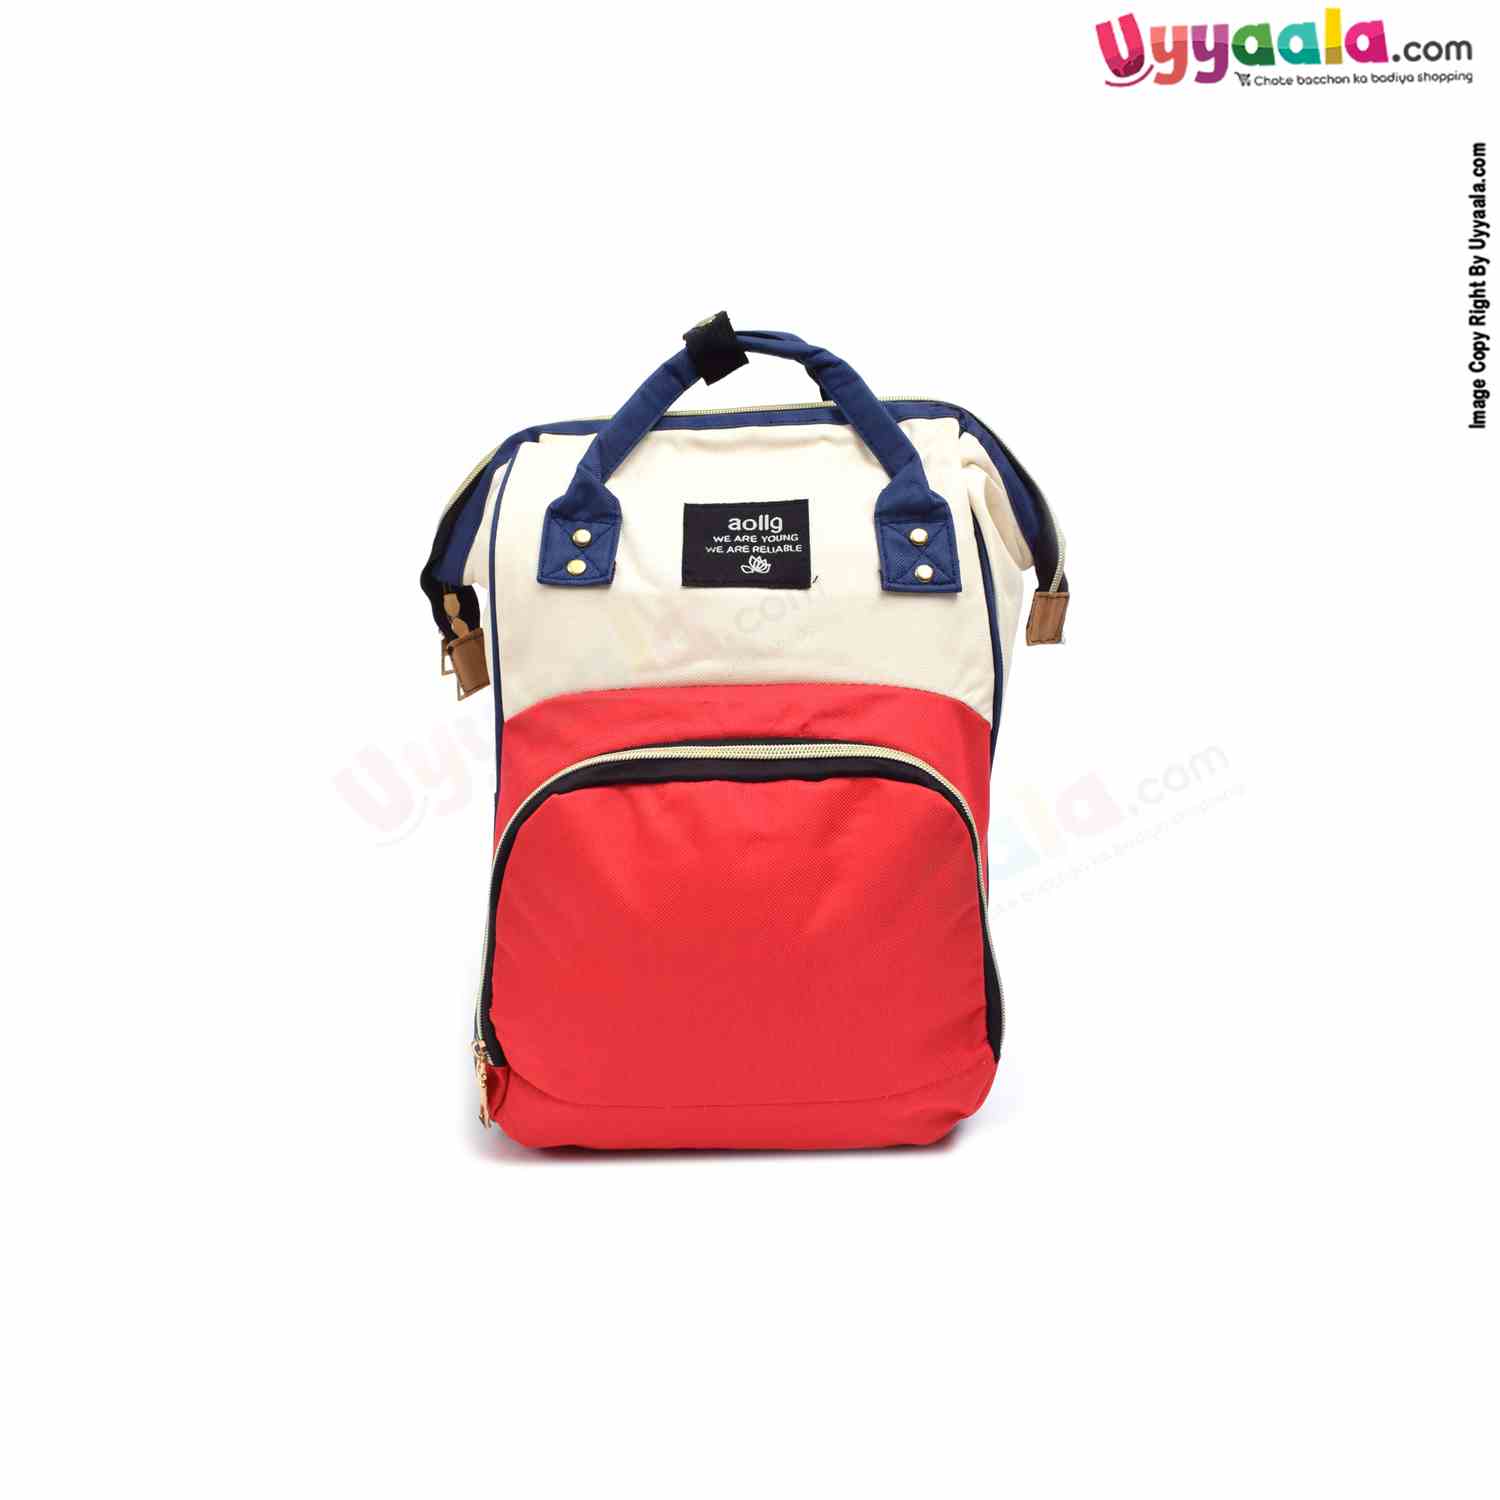 Mother's back pack (diaper bag) comfortable for travelling mothers, premium quality - size(45*34cm) - red